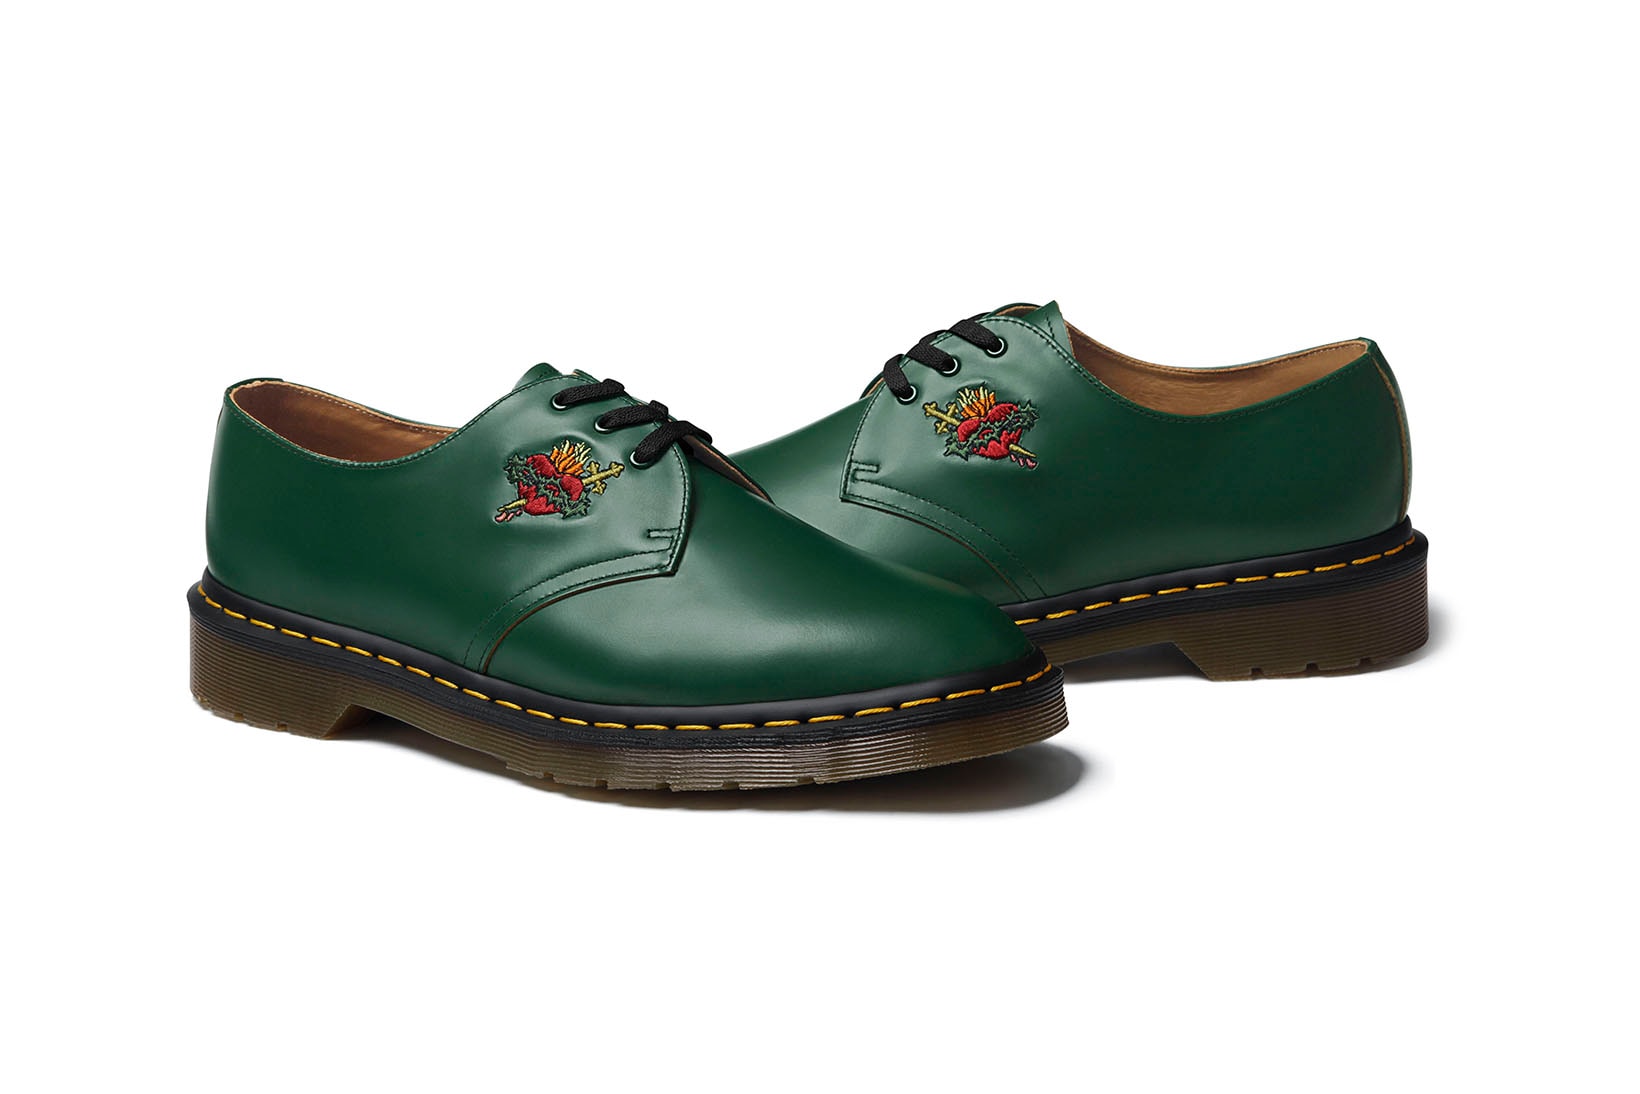 Supreme Dr. Martens Sacred Heart 2017 Fall/Winter Collection Black Green Oxblood